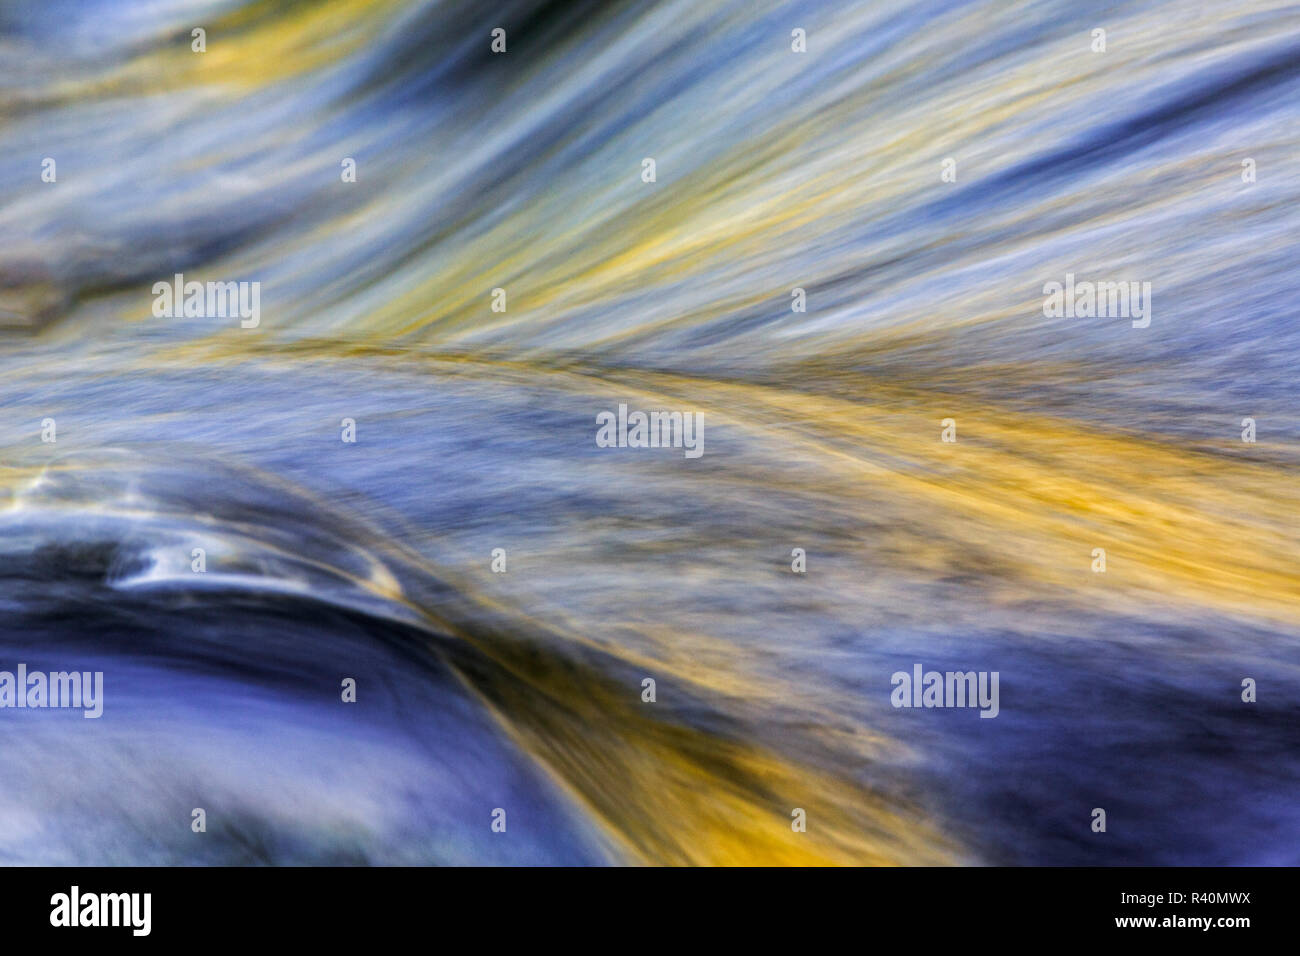 Abstract pattern in flowing stream, Greenbrier, Great Smoky Mountains National Park, Tennessee Stock Photo